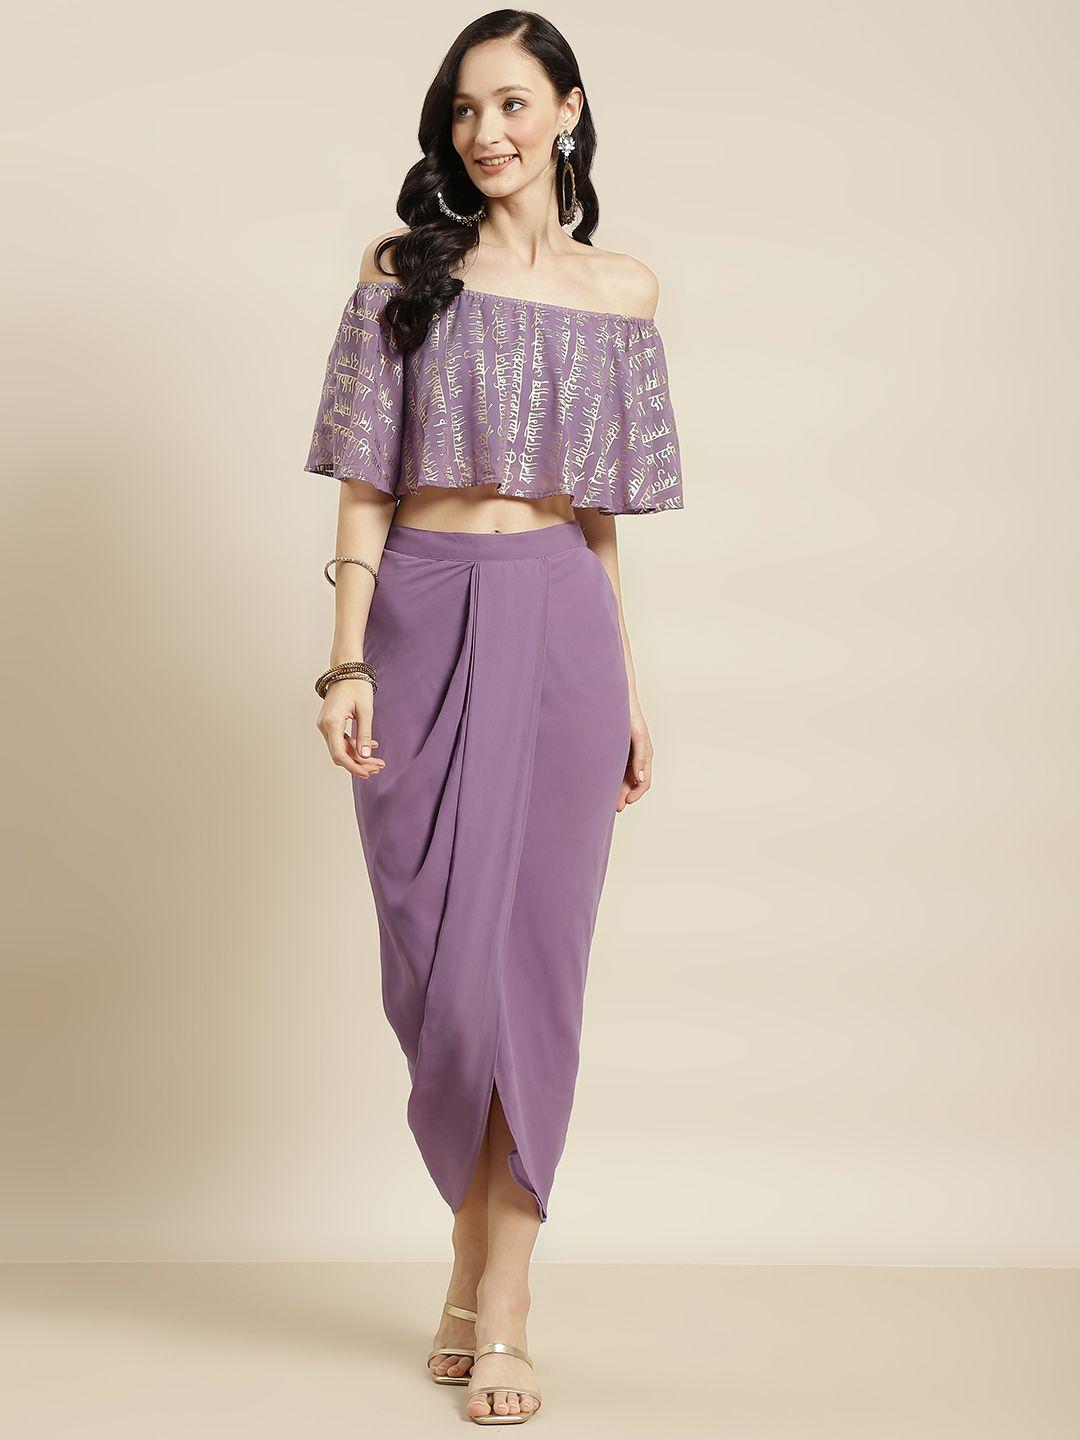 shae by sassafras purple foil crop top with dhoti skirt